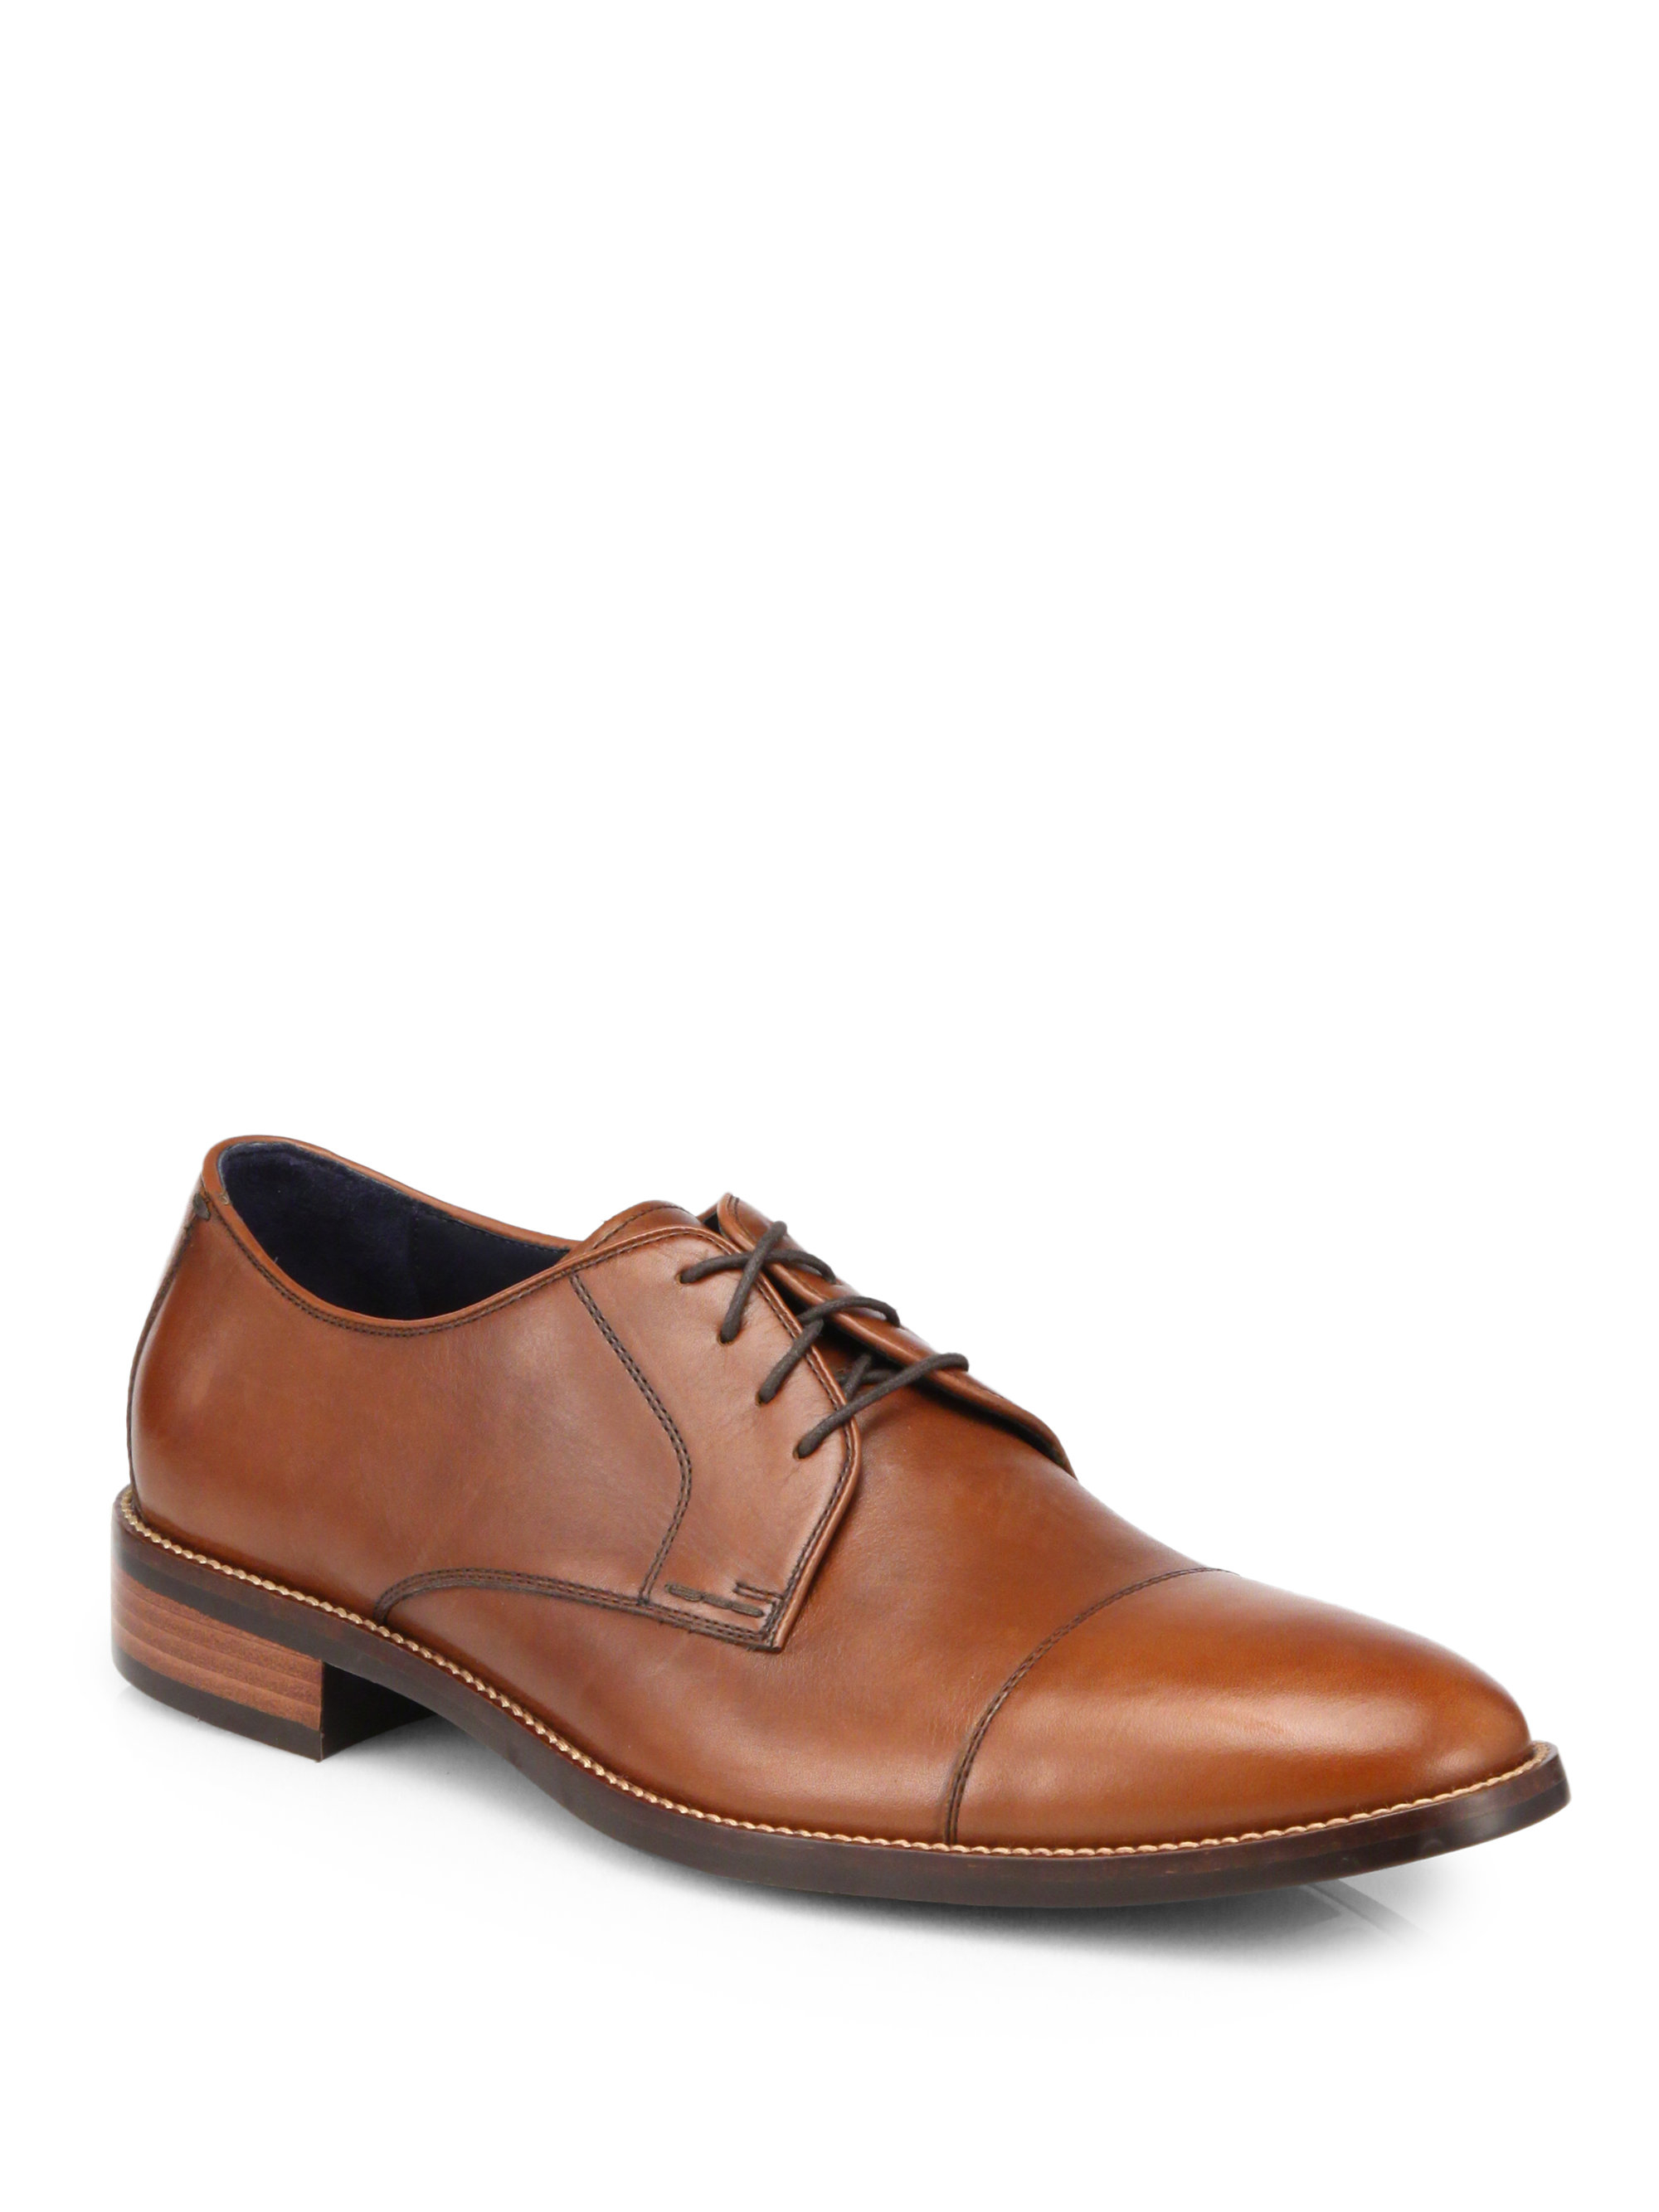 Cole Haan Lenox Hill Cap-Toe Oxfords in Brown for Men - Lyst